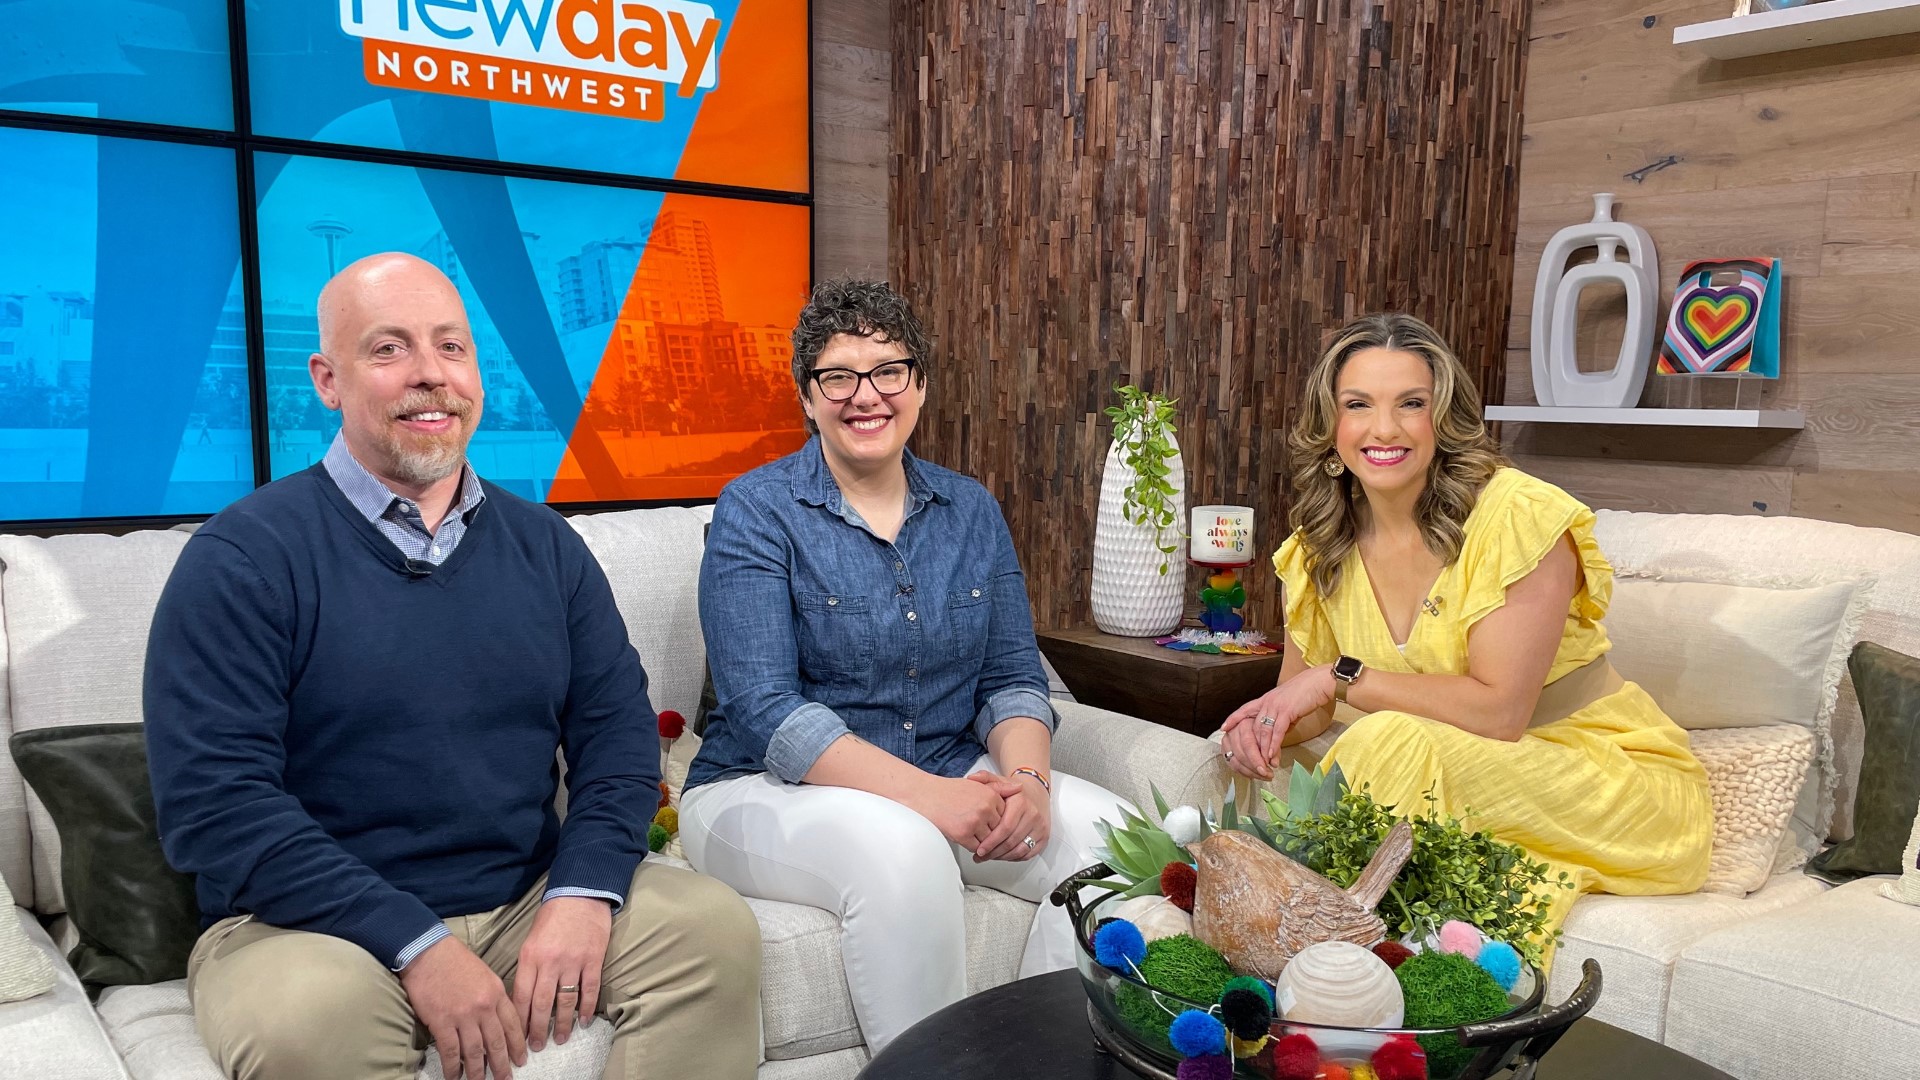 Elaine Helm and Fred Swanson speak on LGBTQ+ resources and lack of representation. #newdaynw